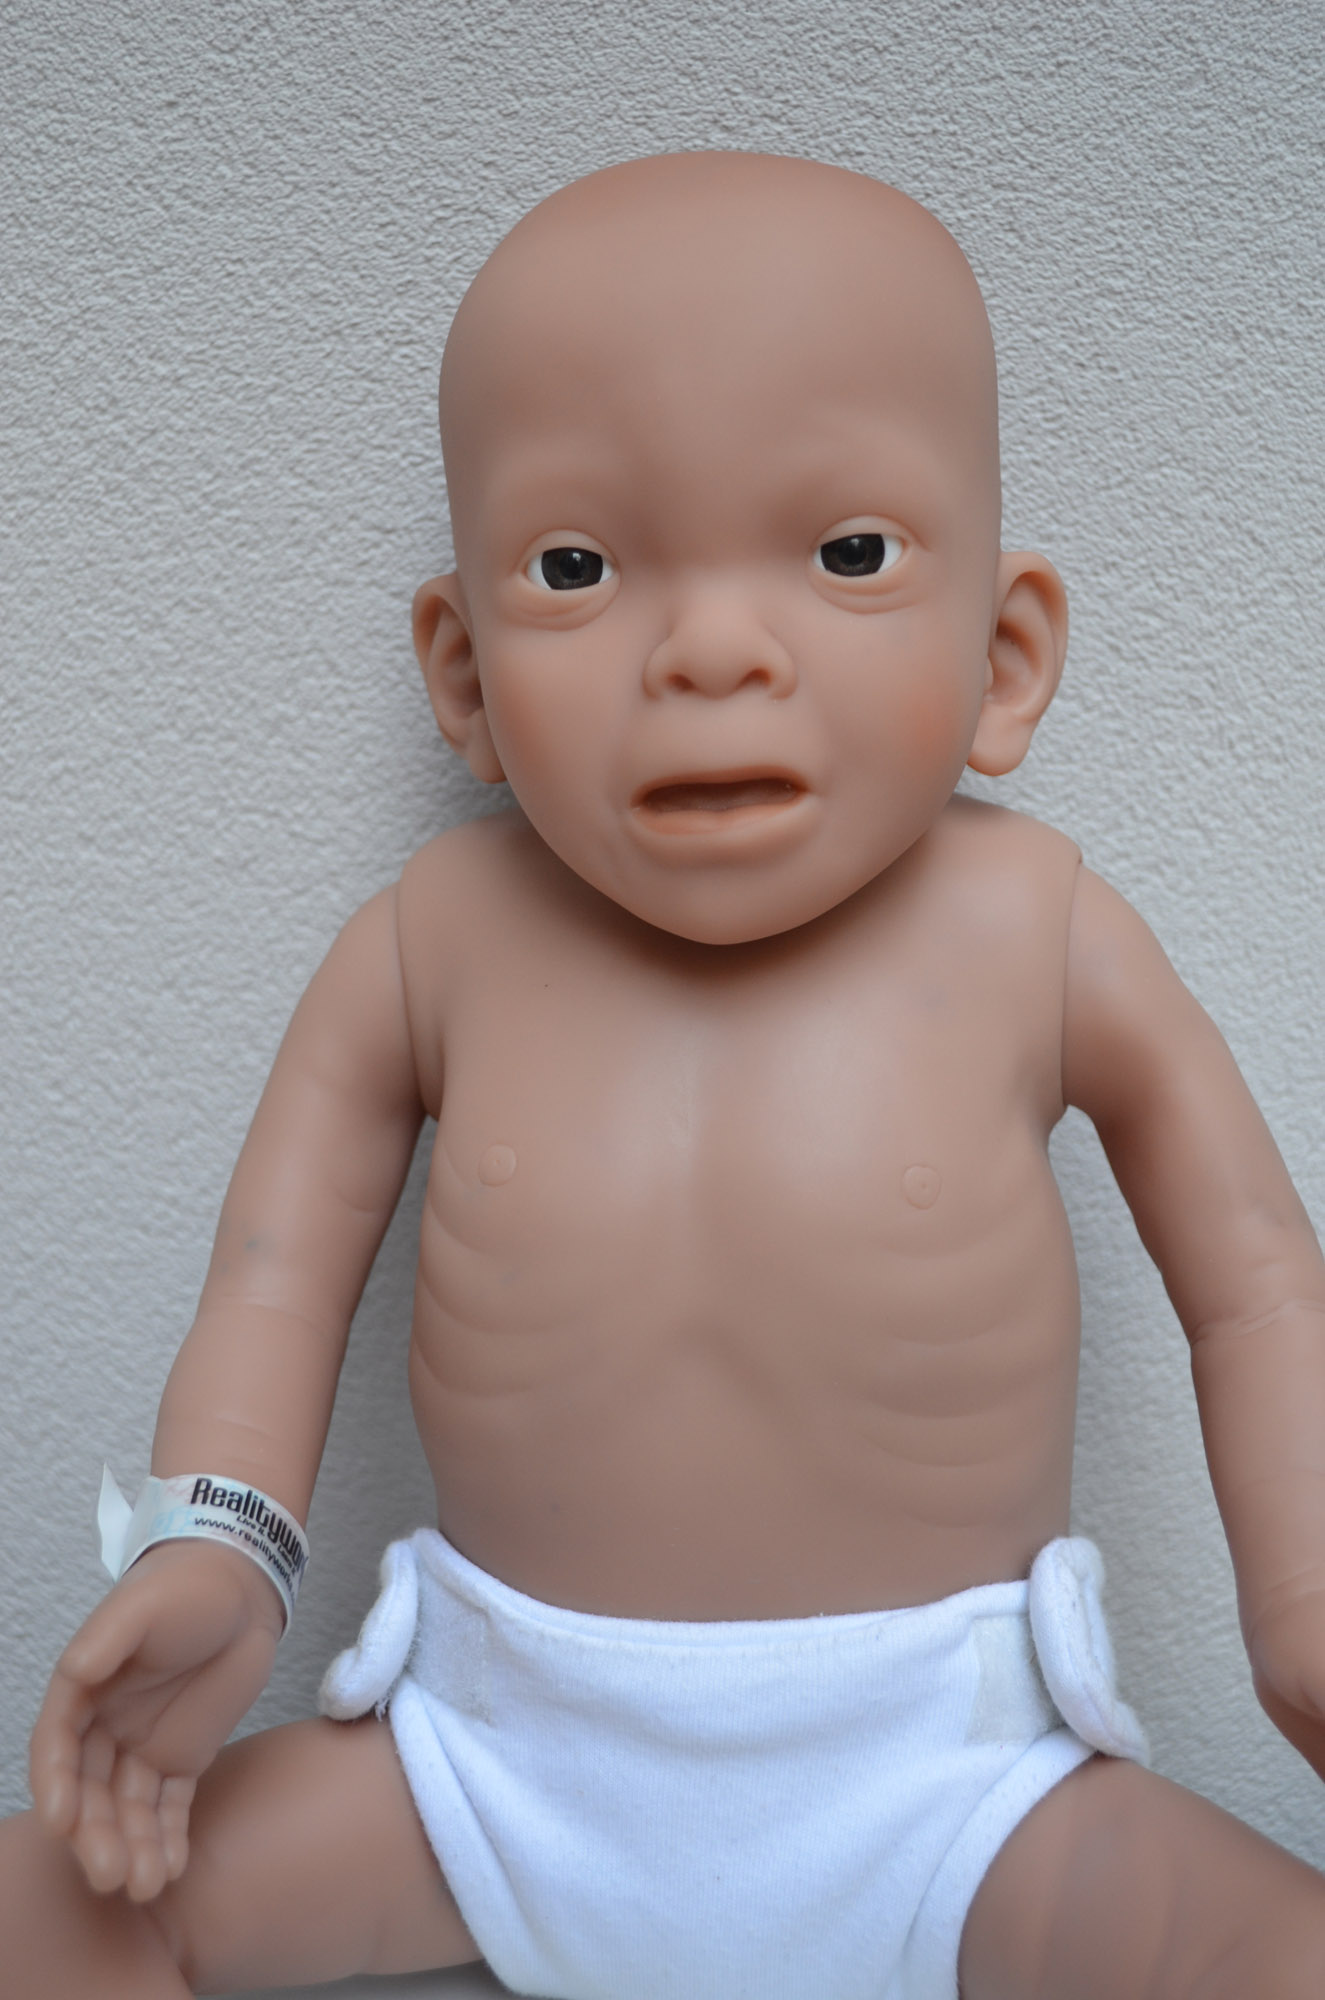 real care baby think it over dolls for sale